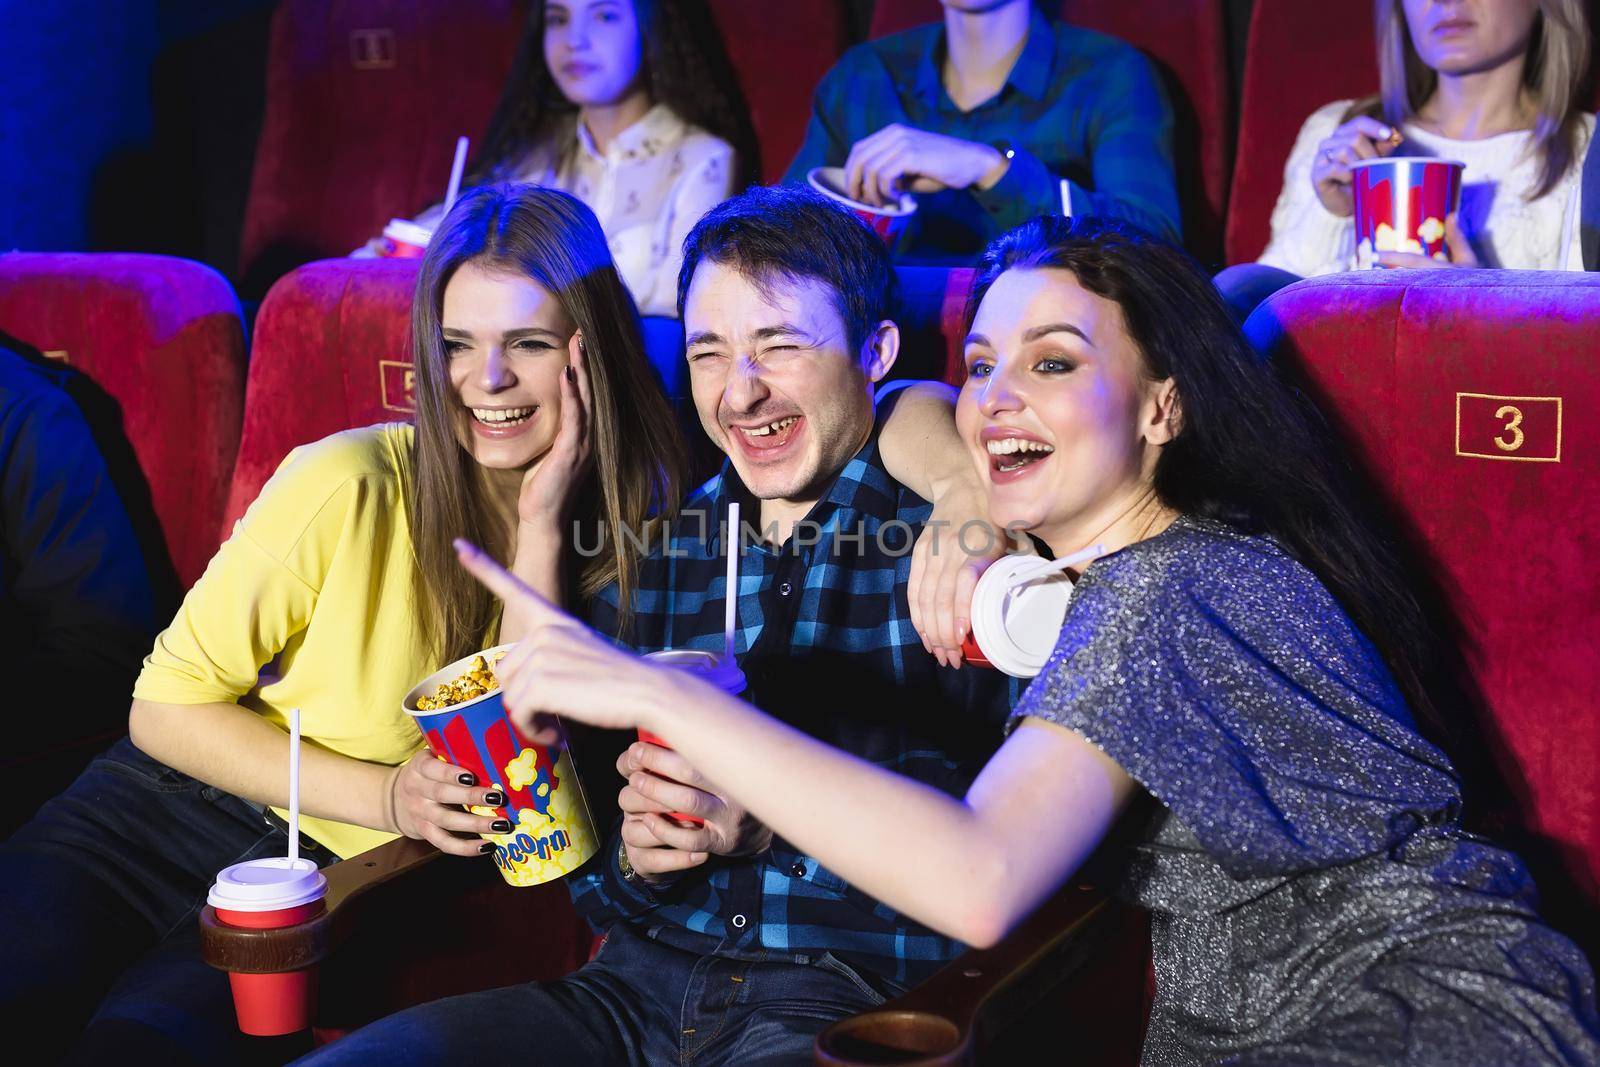 Two young girls and a guy watching a comedy in a cinema. Young friends watching movie in cinema. Group of people in theater with popcorn and drinks